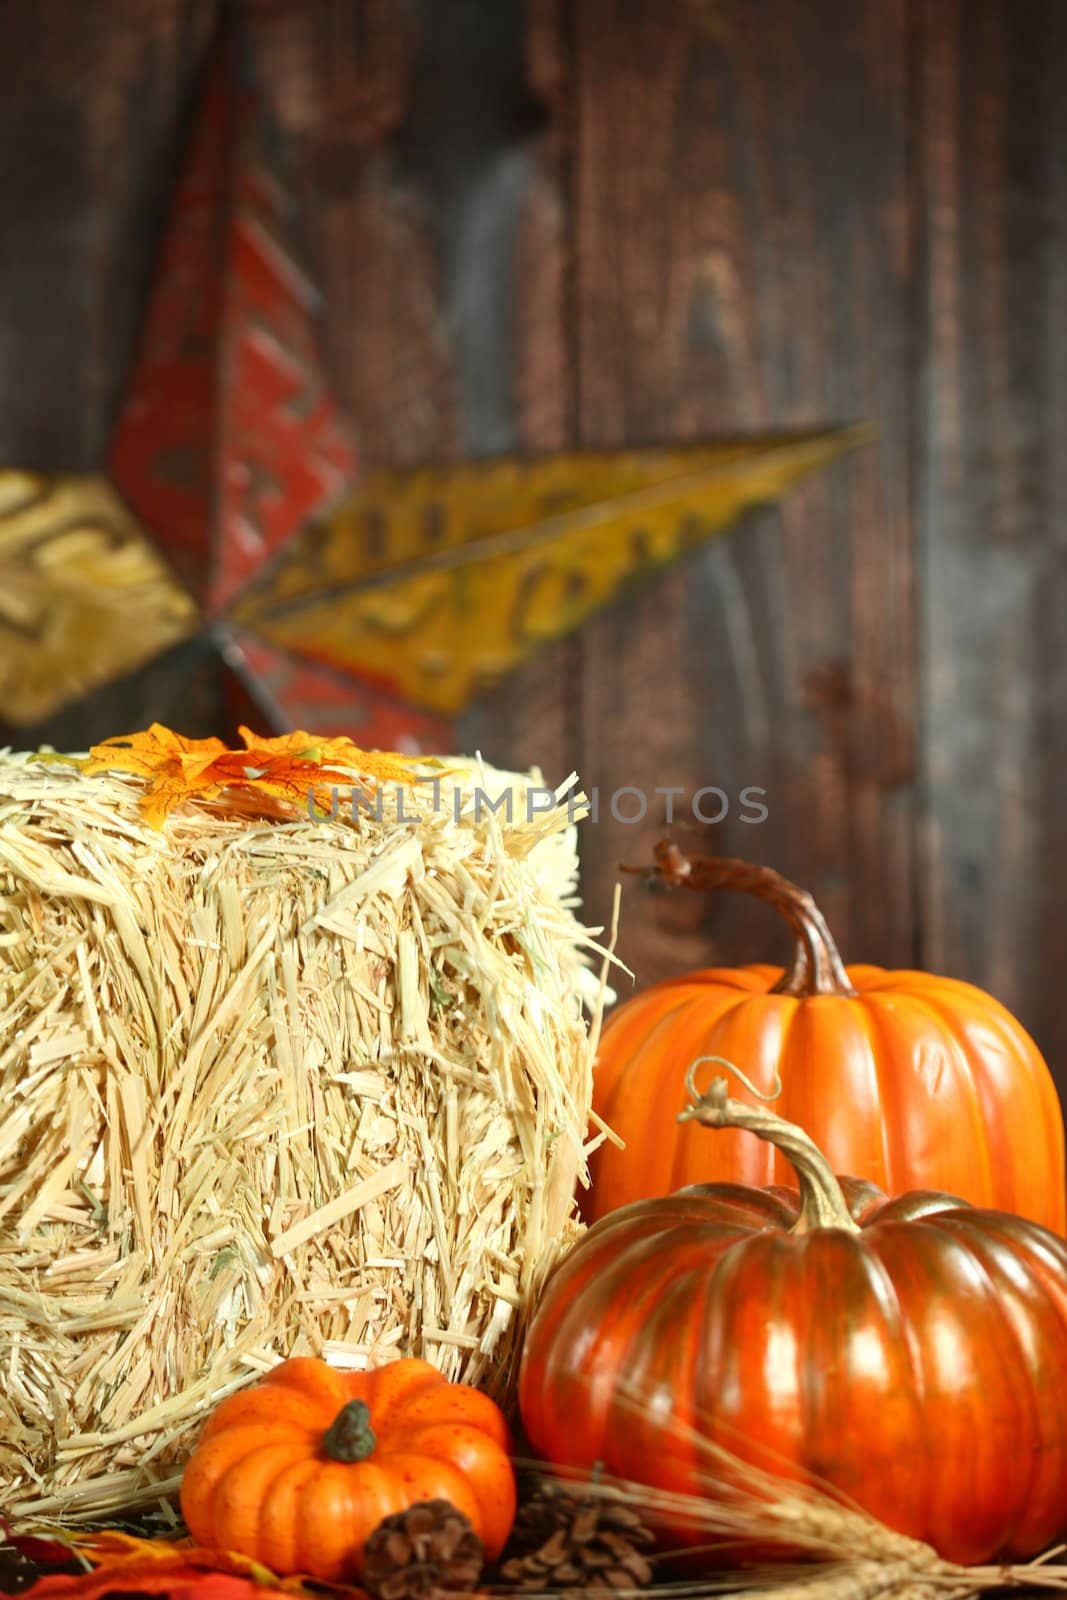 Fall Themed Scene With Pumpkins on Wood  by tobkatrina